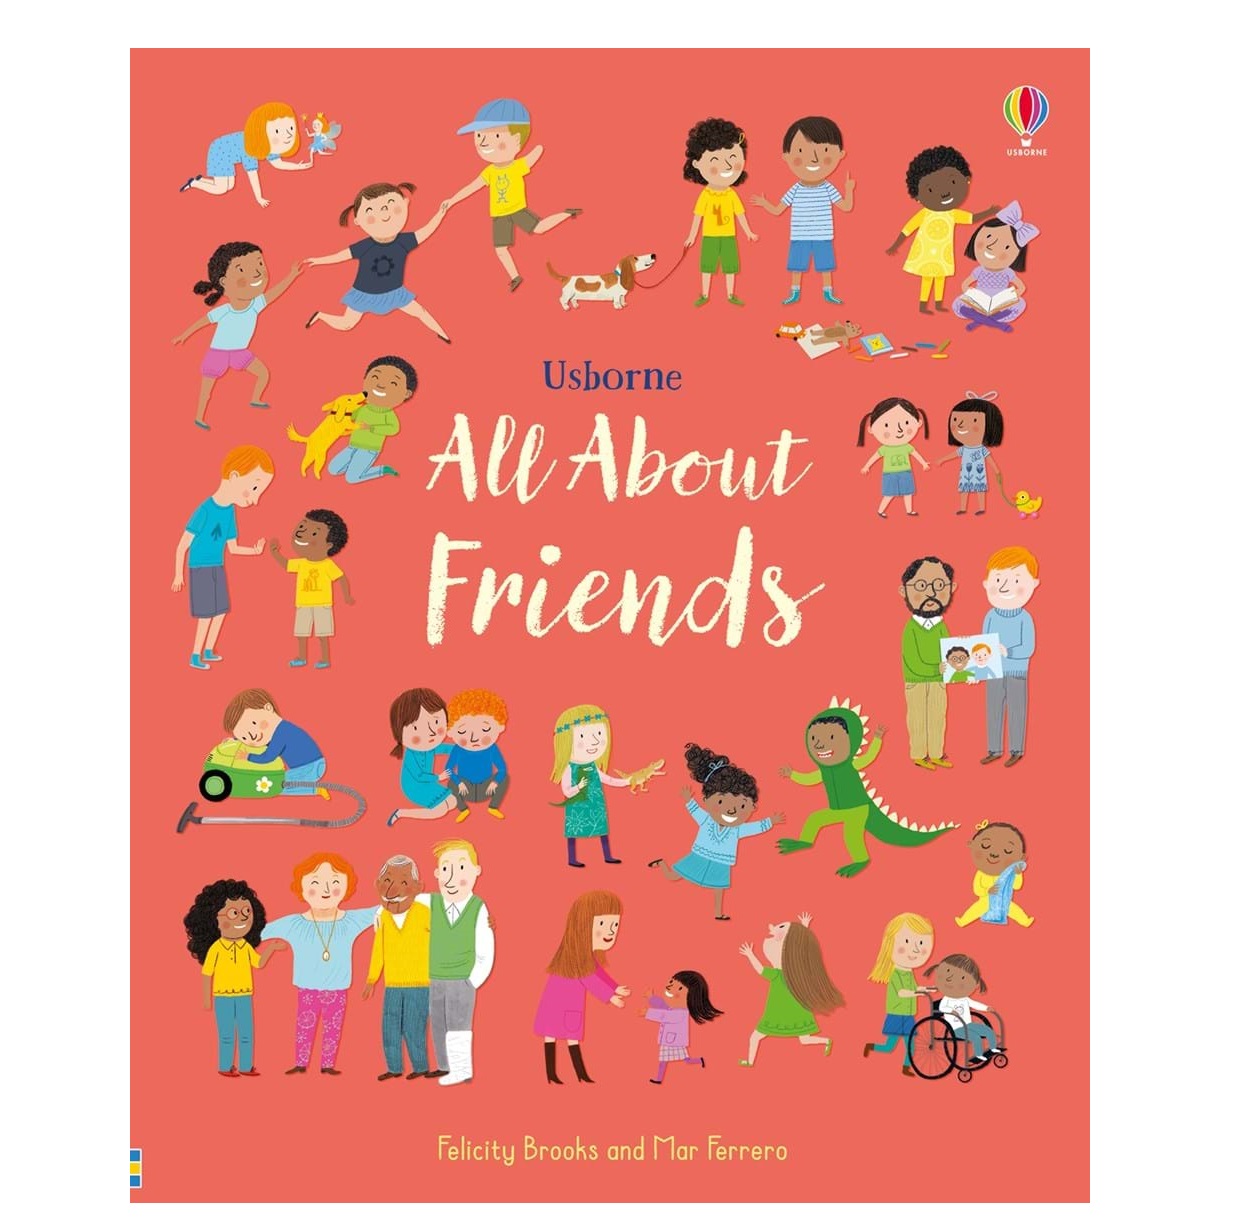 All About Friends - Felicity Brooks, англ. язык (9781474968386) - фото 1